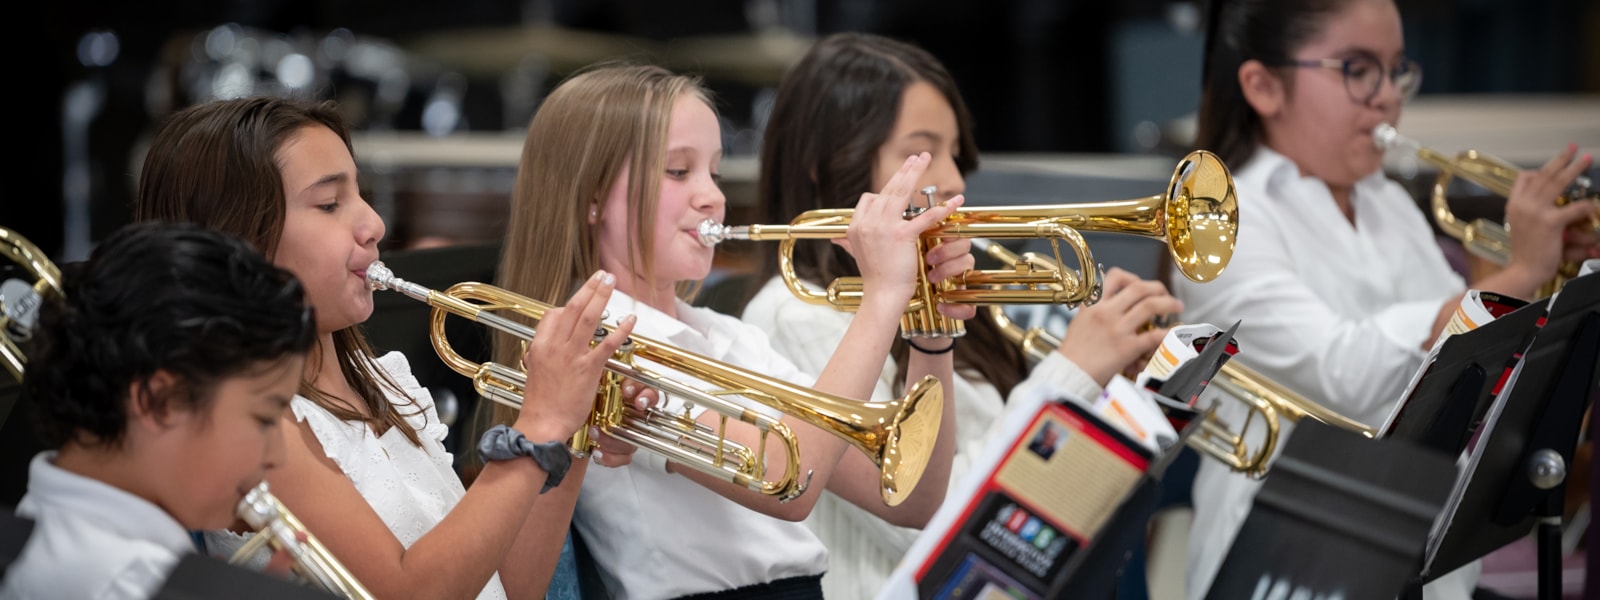 Students playing trumpet at Festival of the Arts